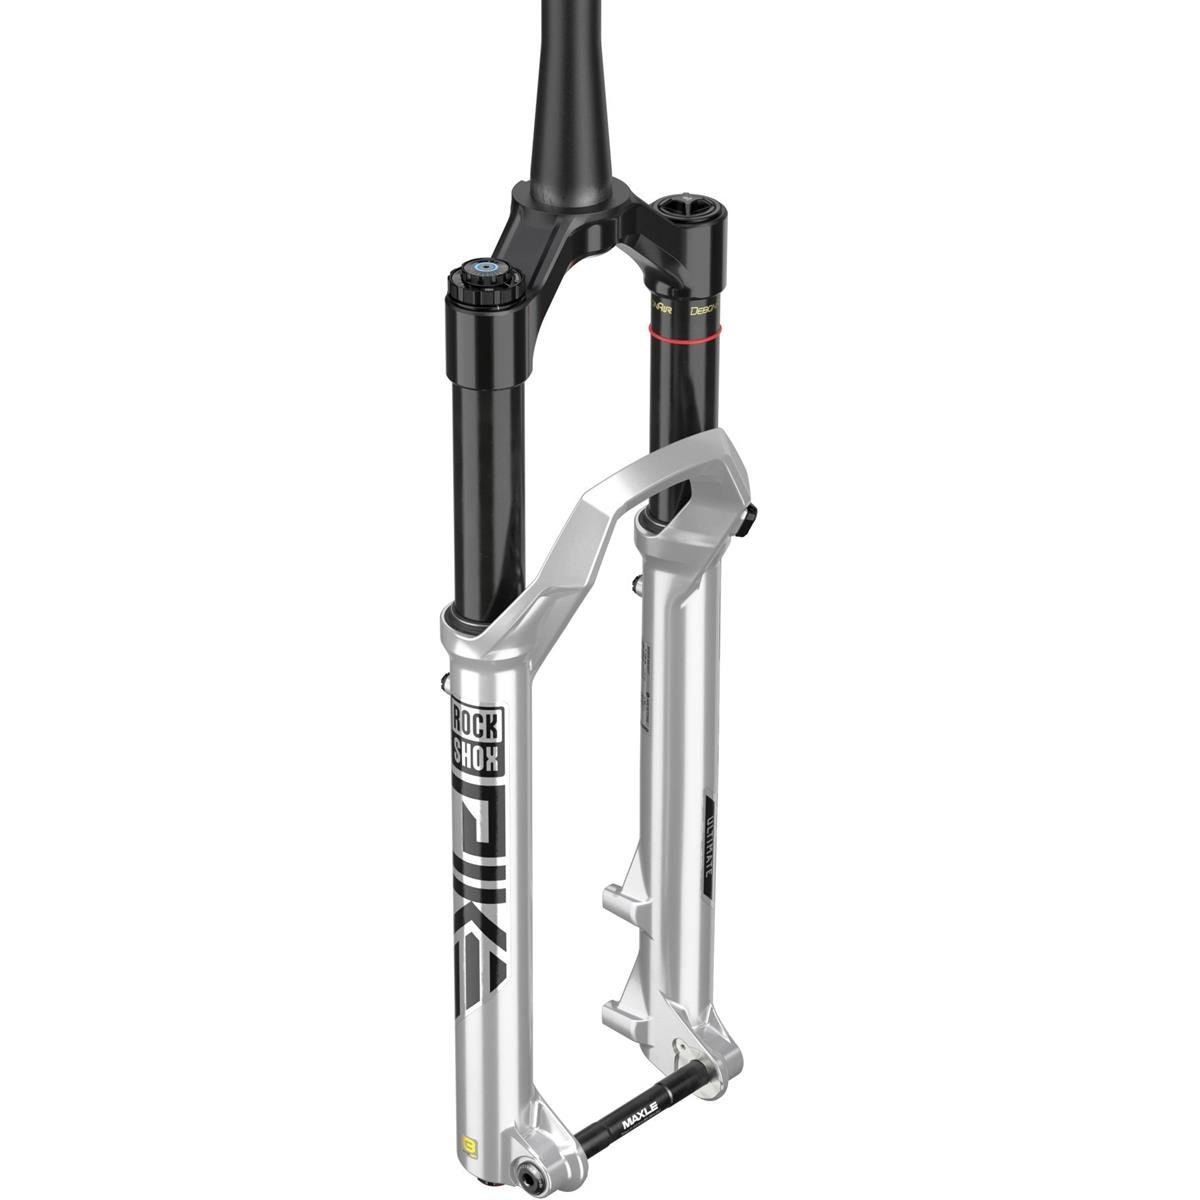 RockShox Forcella Pike Ultimate Charger 3 RC2 27.5 Pollici, 15x110 mm, Argento, 140 mm